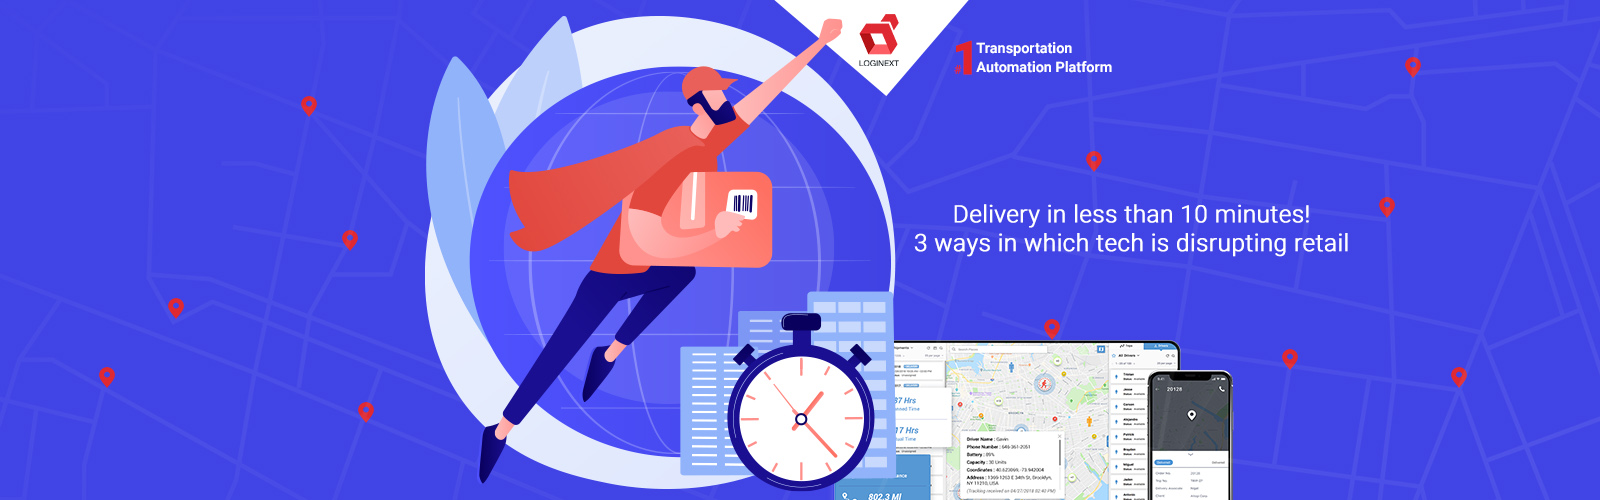 Delivery in less than 10 minutes! 3 ways in which tech is disrupting retail